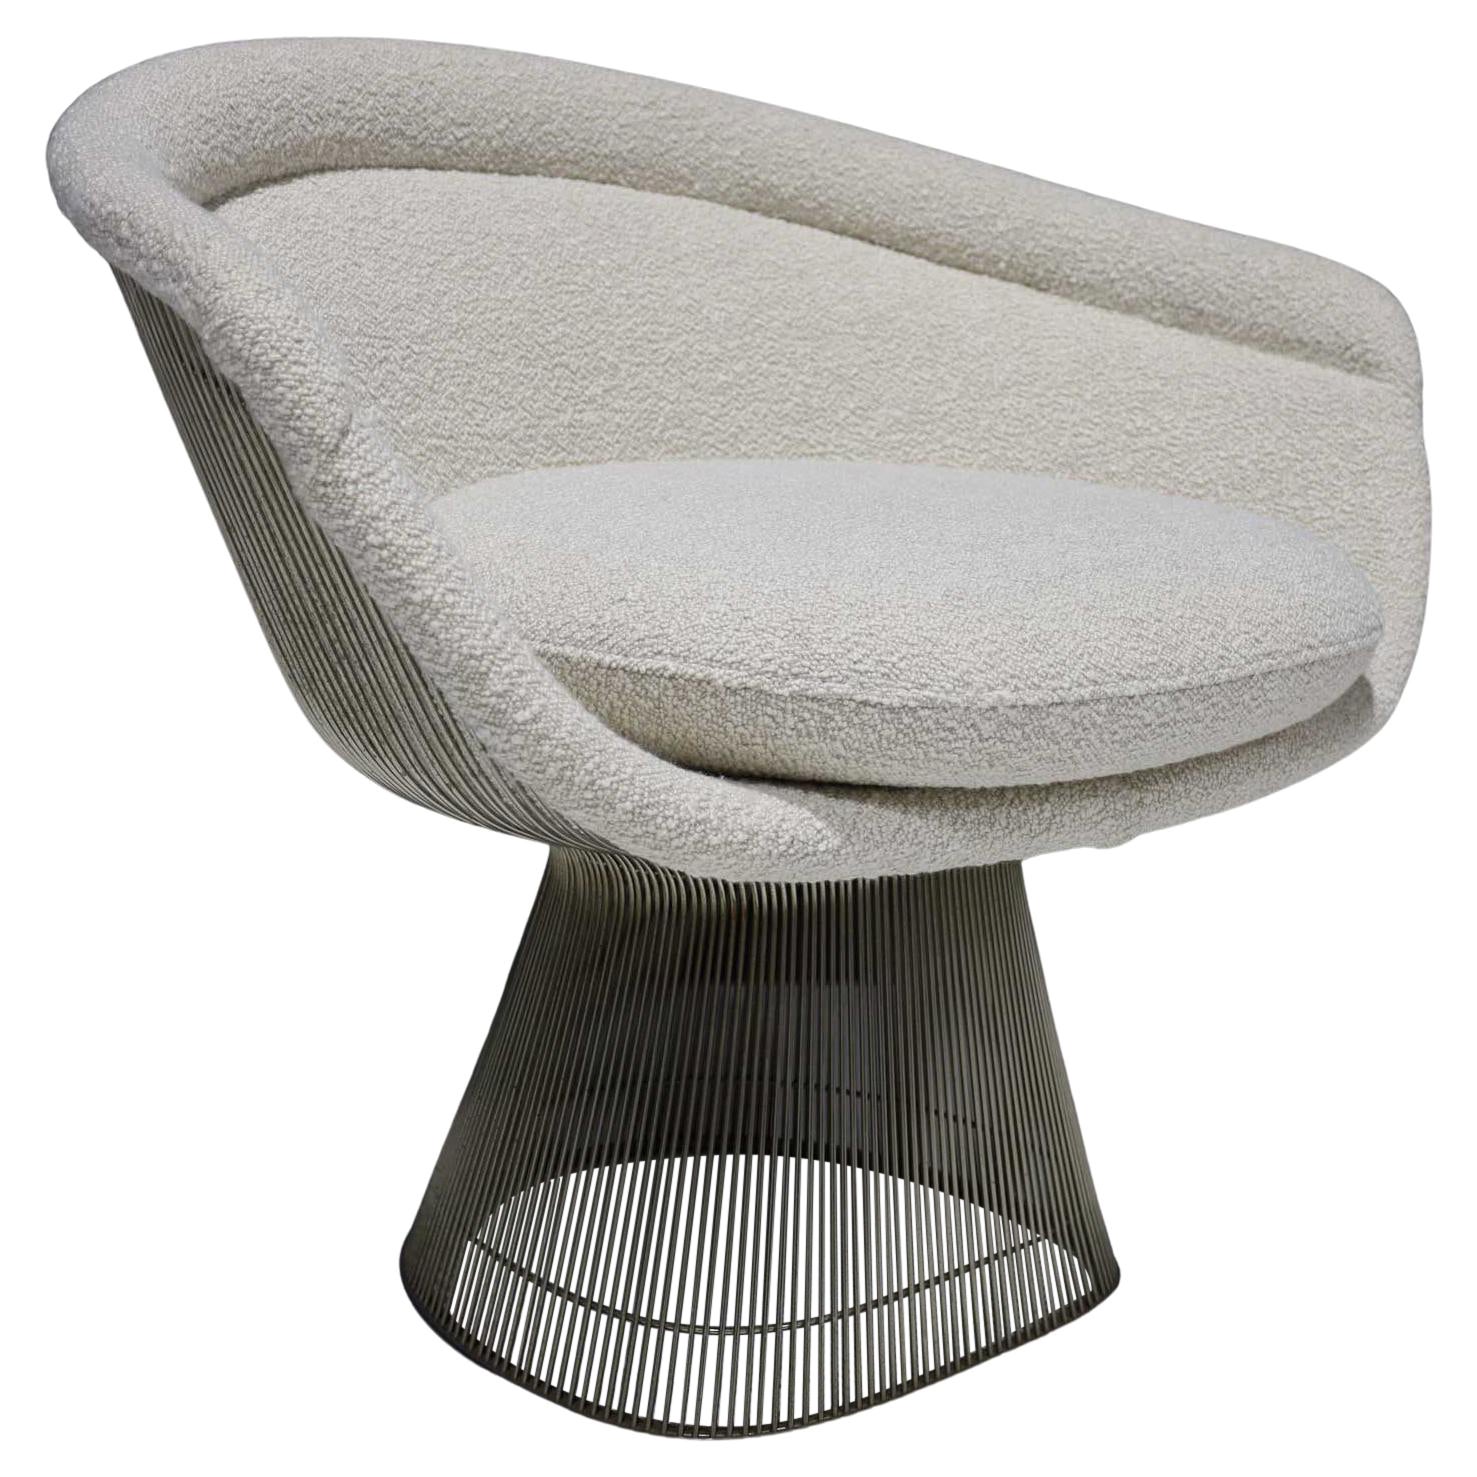 Warren Platner for Knoll Lounge Chair in Off-White Boucle